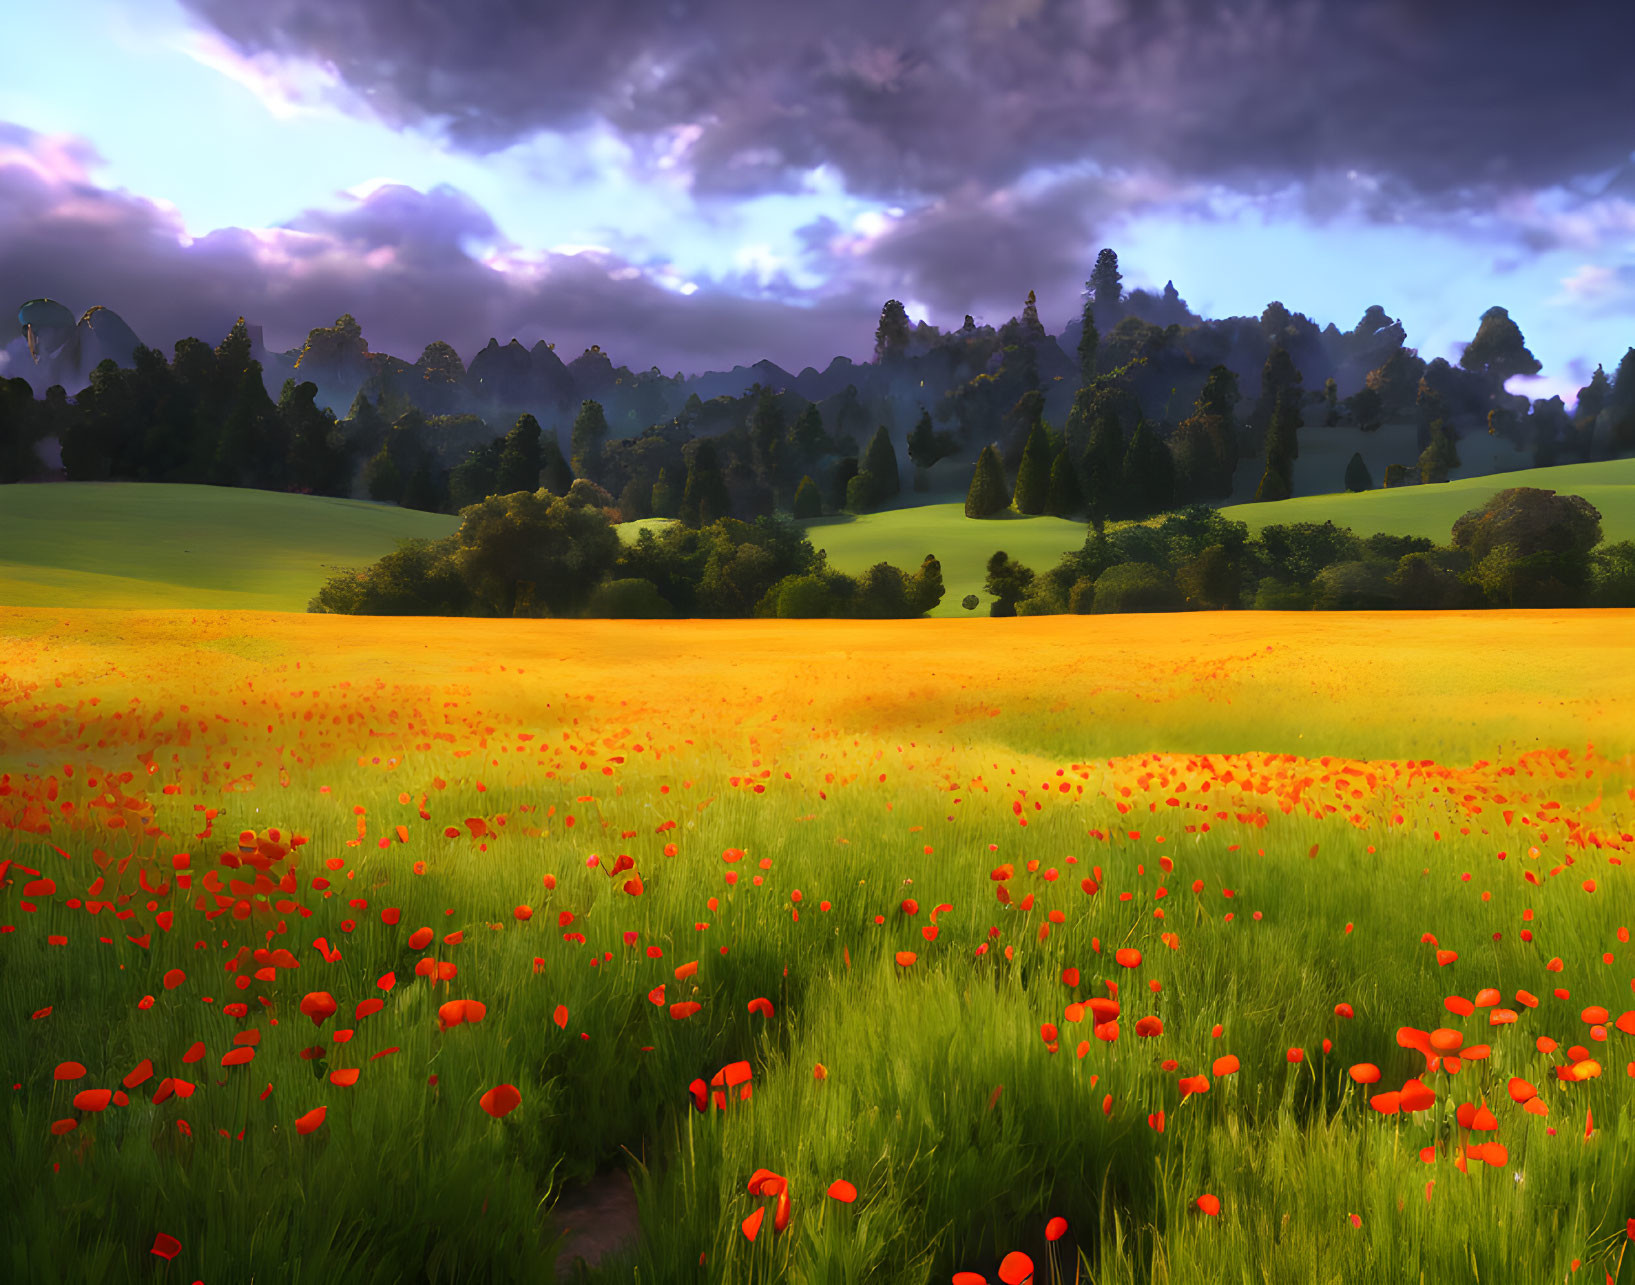 Scenic sunrise landscape with red poppies and dramatic sky